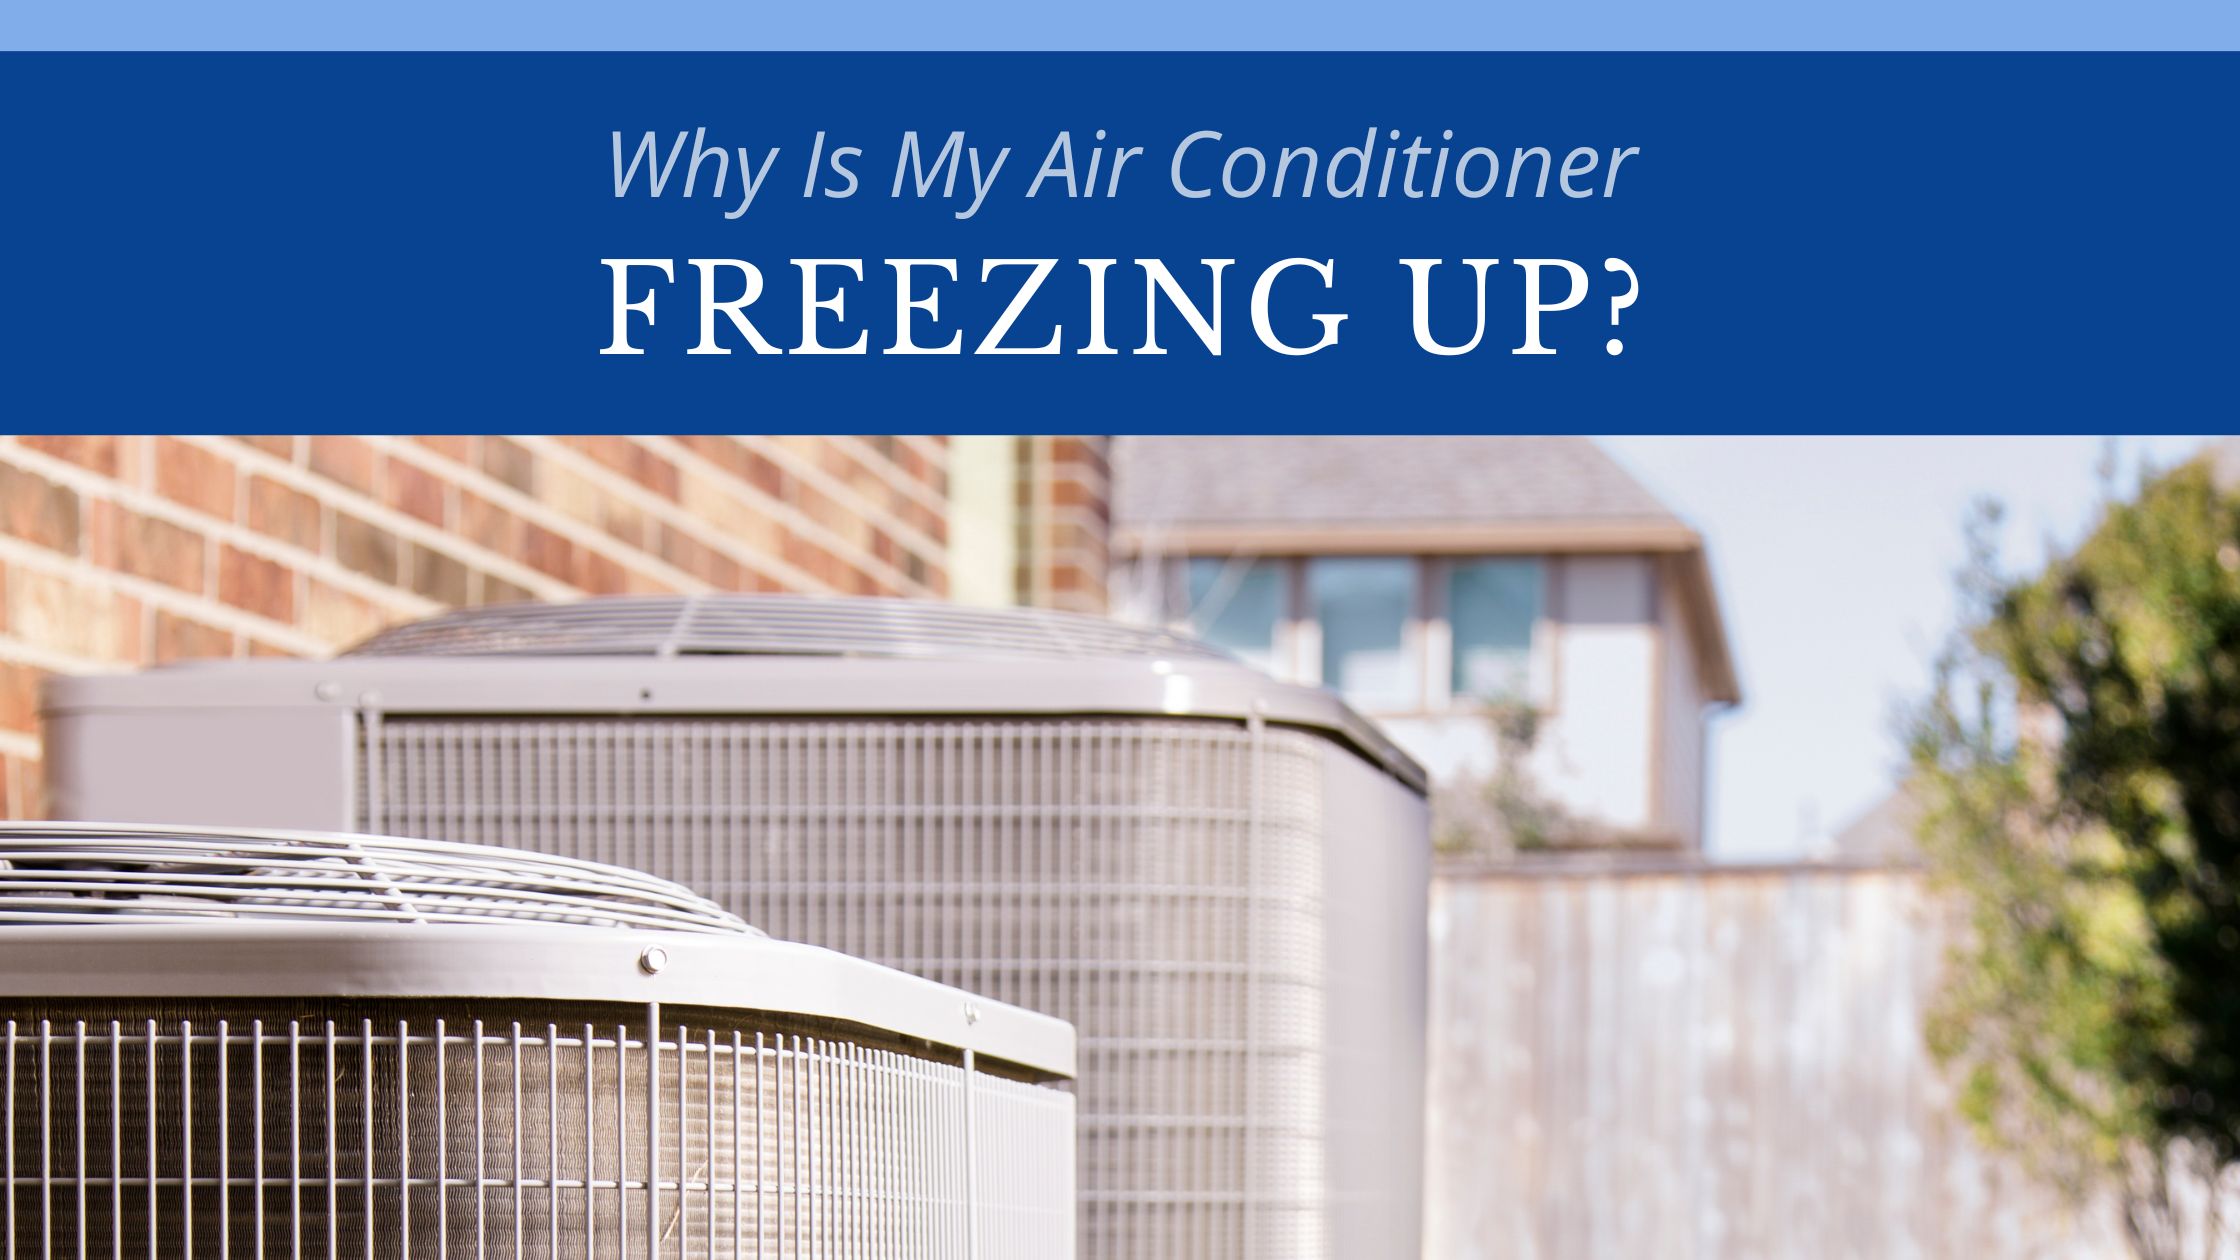 Why Is My Air Conditioner Freezing Up? 5 Reasons & Tips